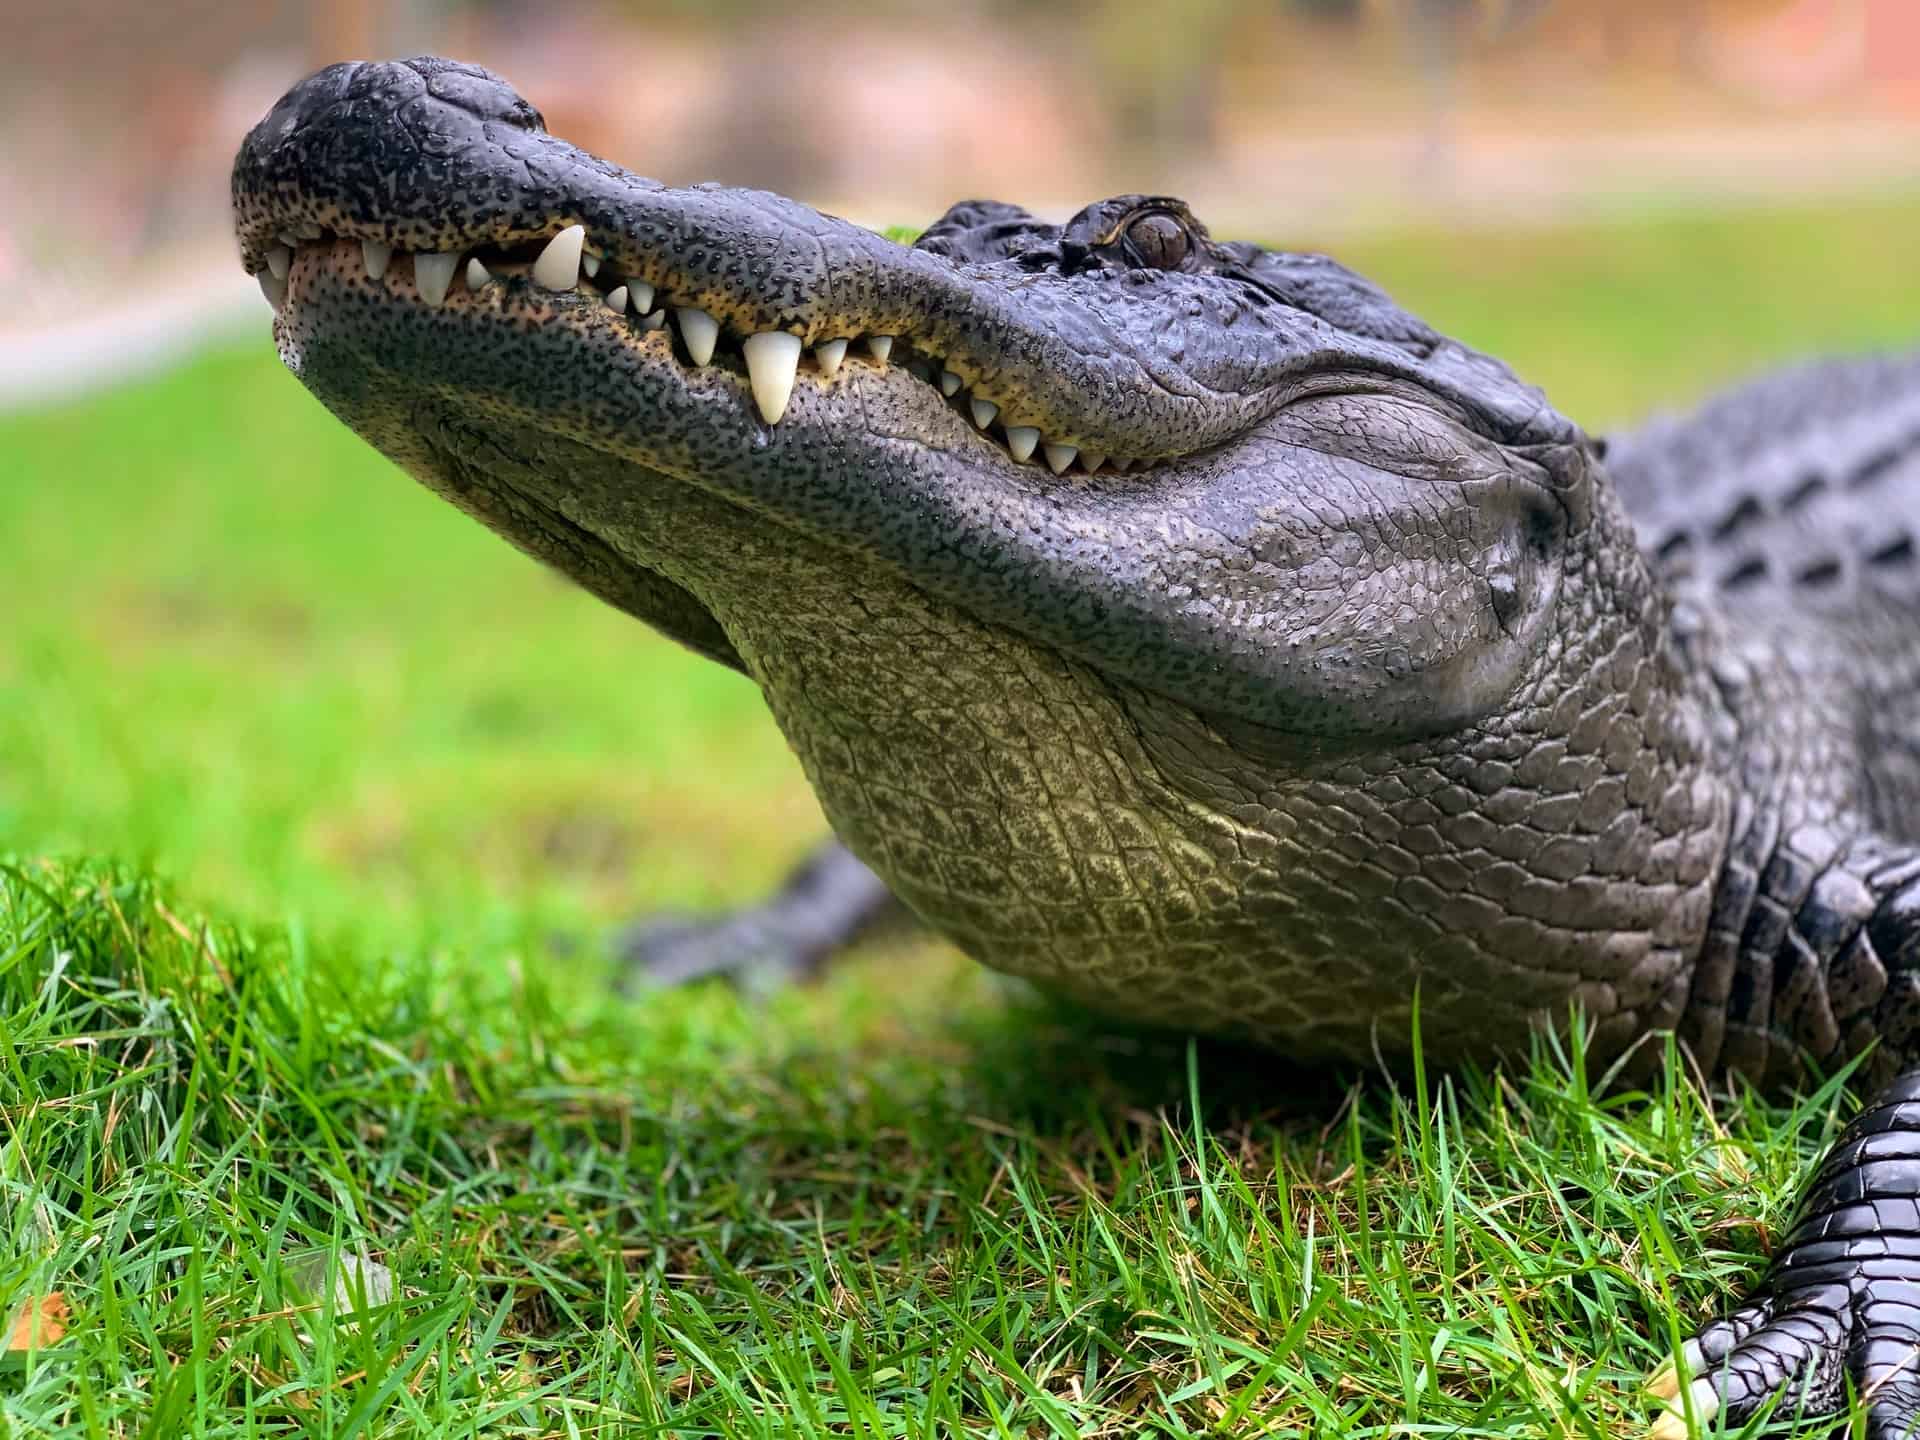 Man Intentionally Hits Alligator and Nest with Lawn Mower